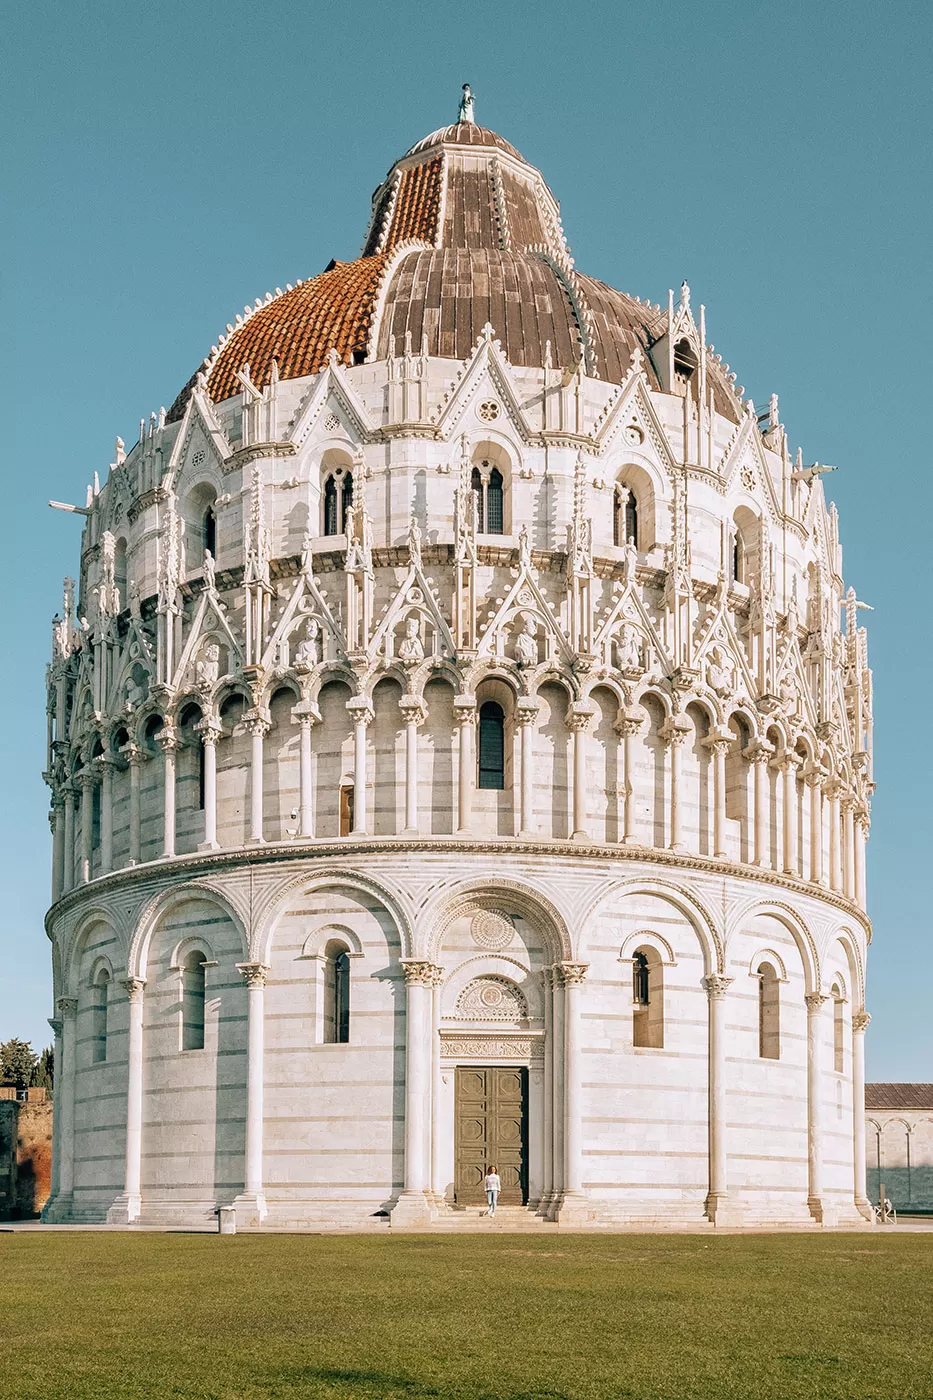 Things to do in Pisa Italy - Piazza dei Miracoli - Michele standing outside Baptistery